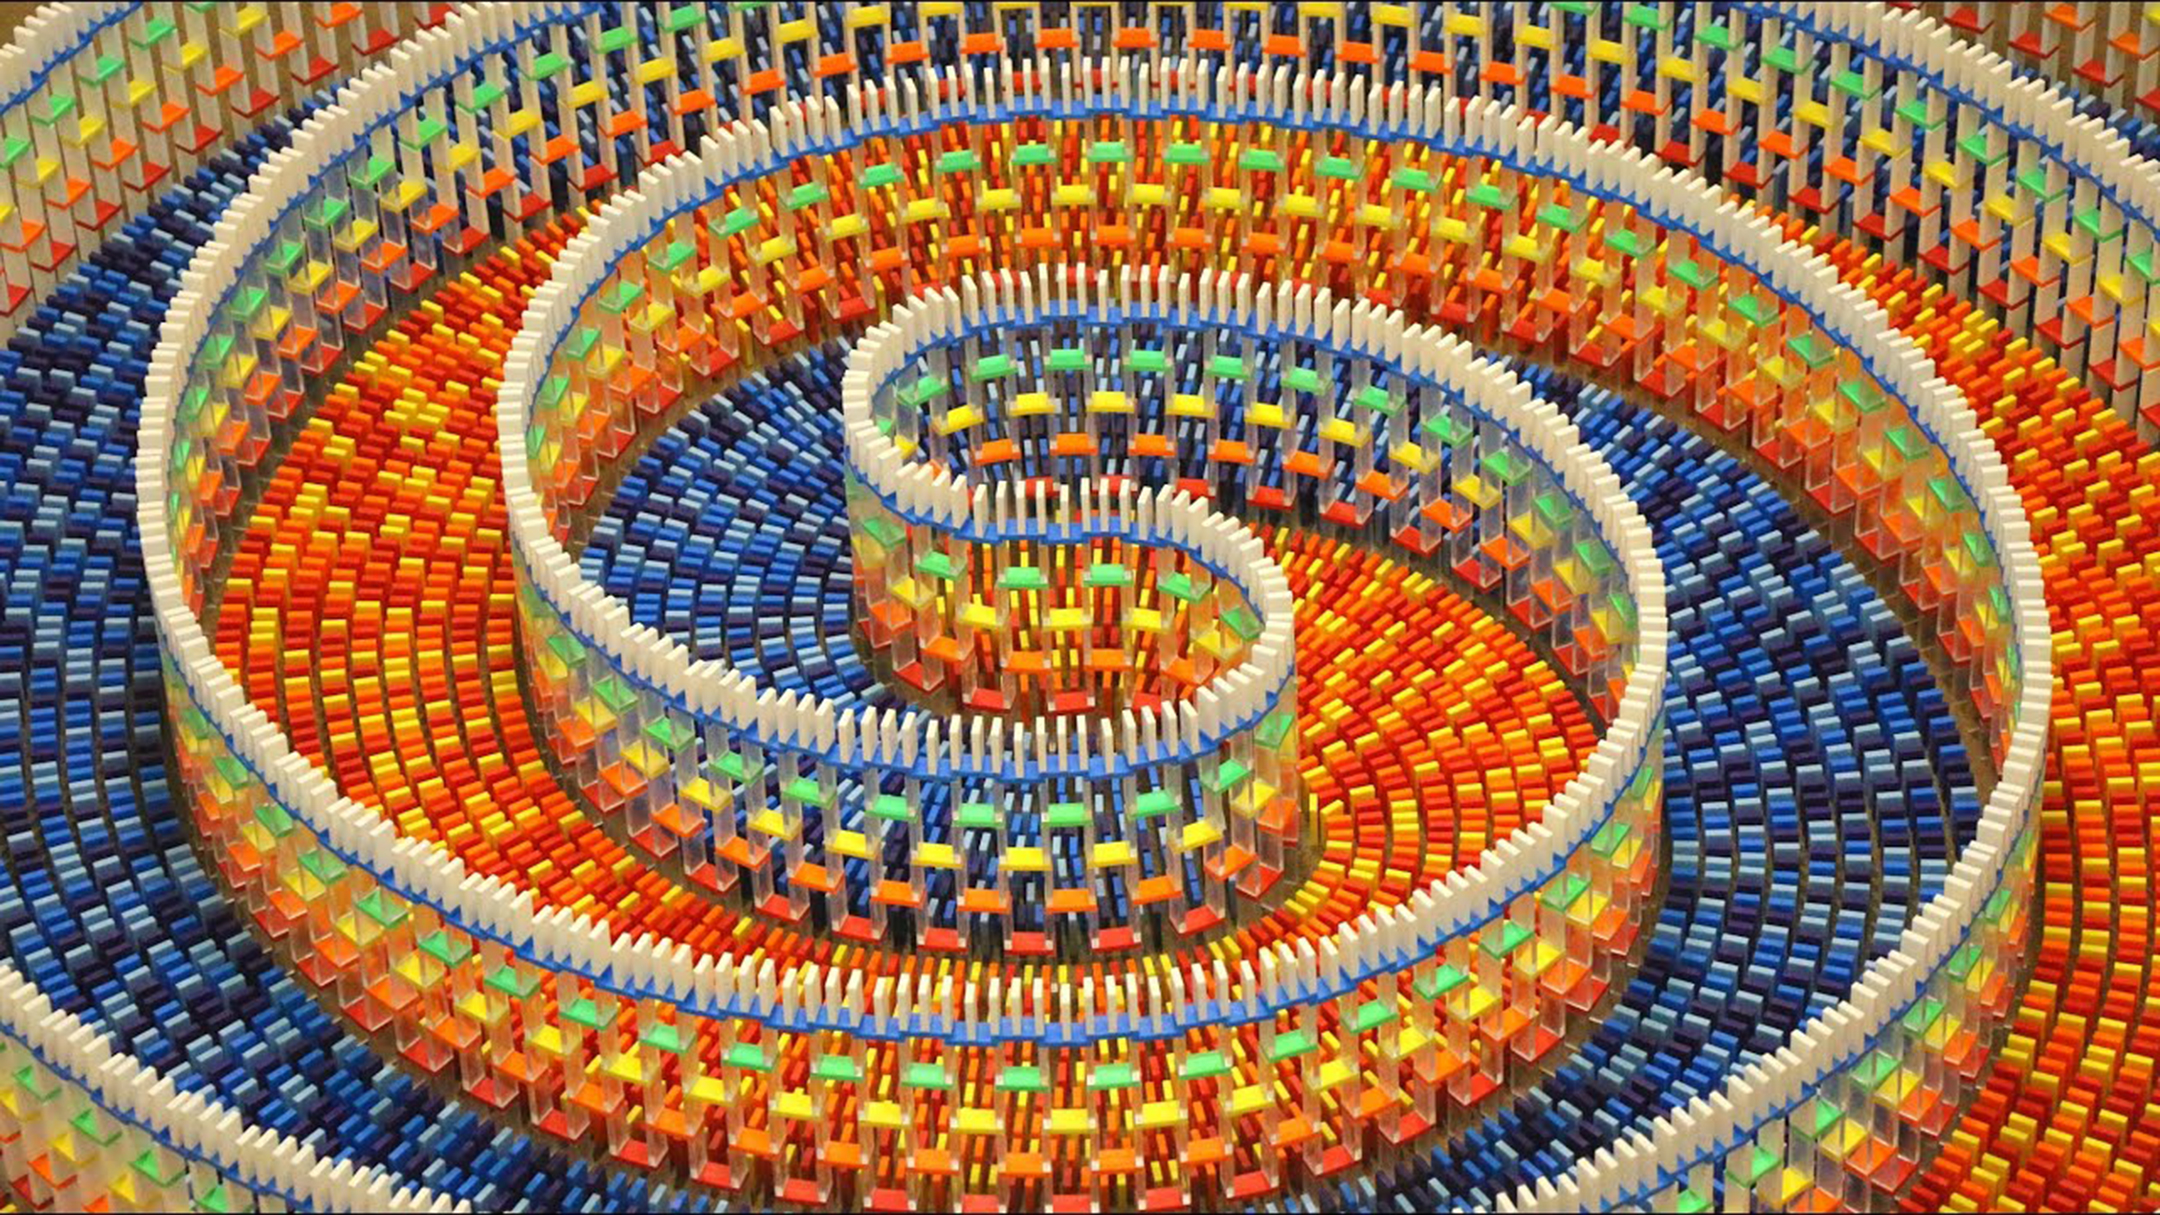 Thousands of dominos organized in a multi-colored spiral